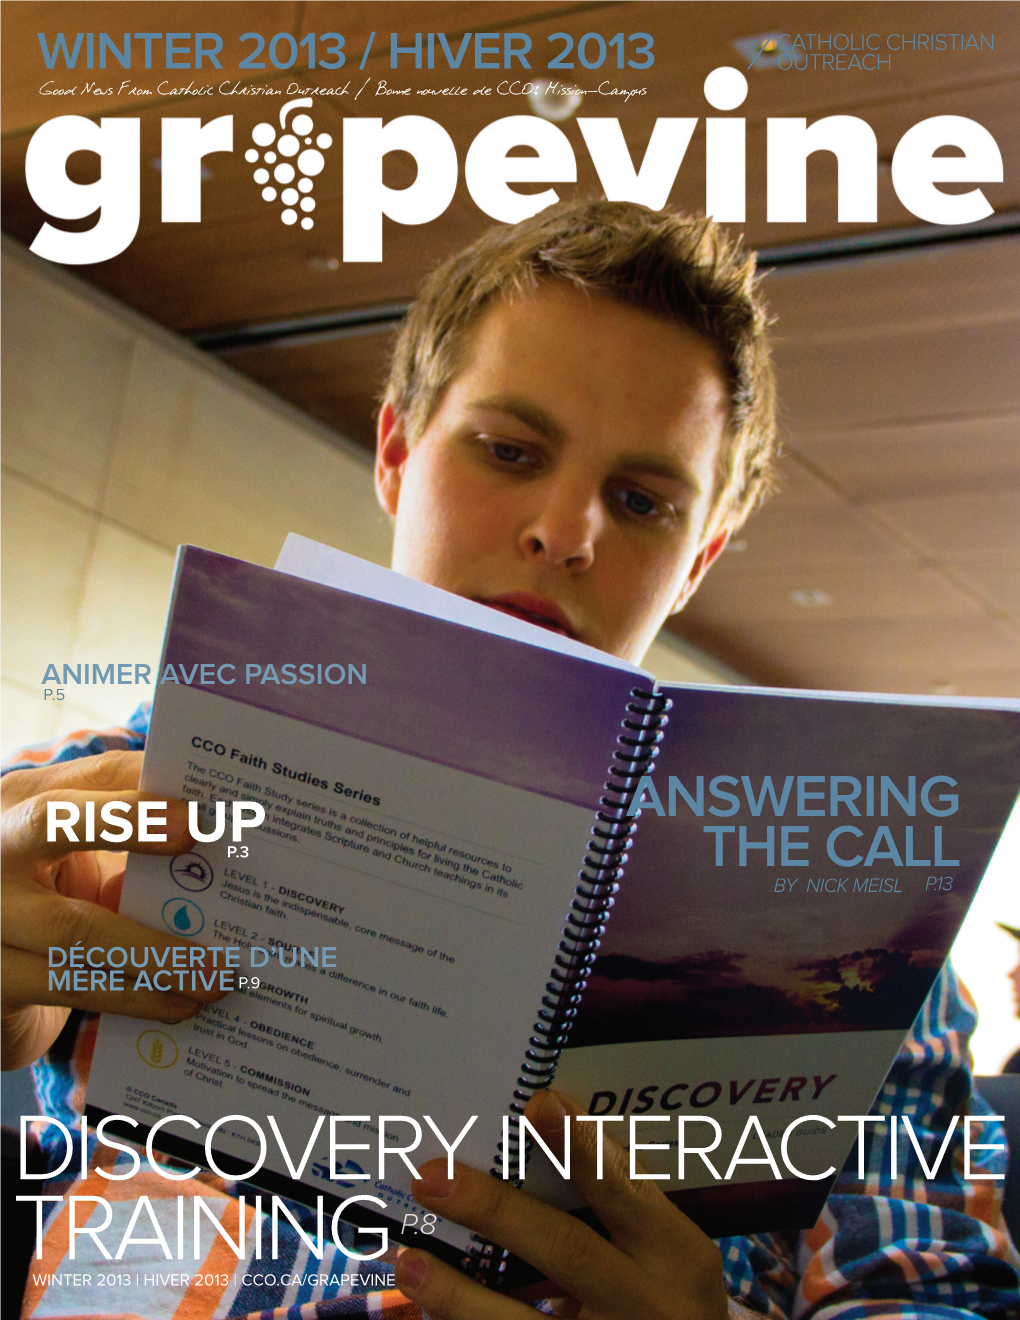 Discovery Interactive Training P.8 Winter 2013 | Hiver 2013 | Cco.Ca/Grapevine Winter Edition /Édition D’Hiver